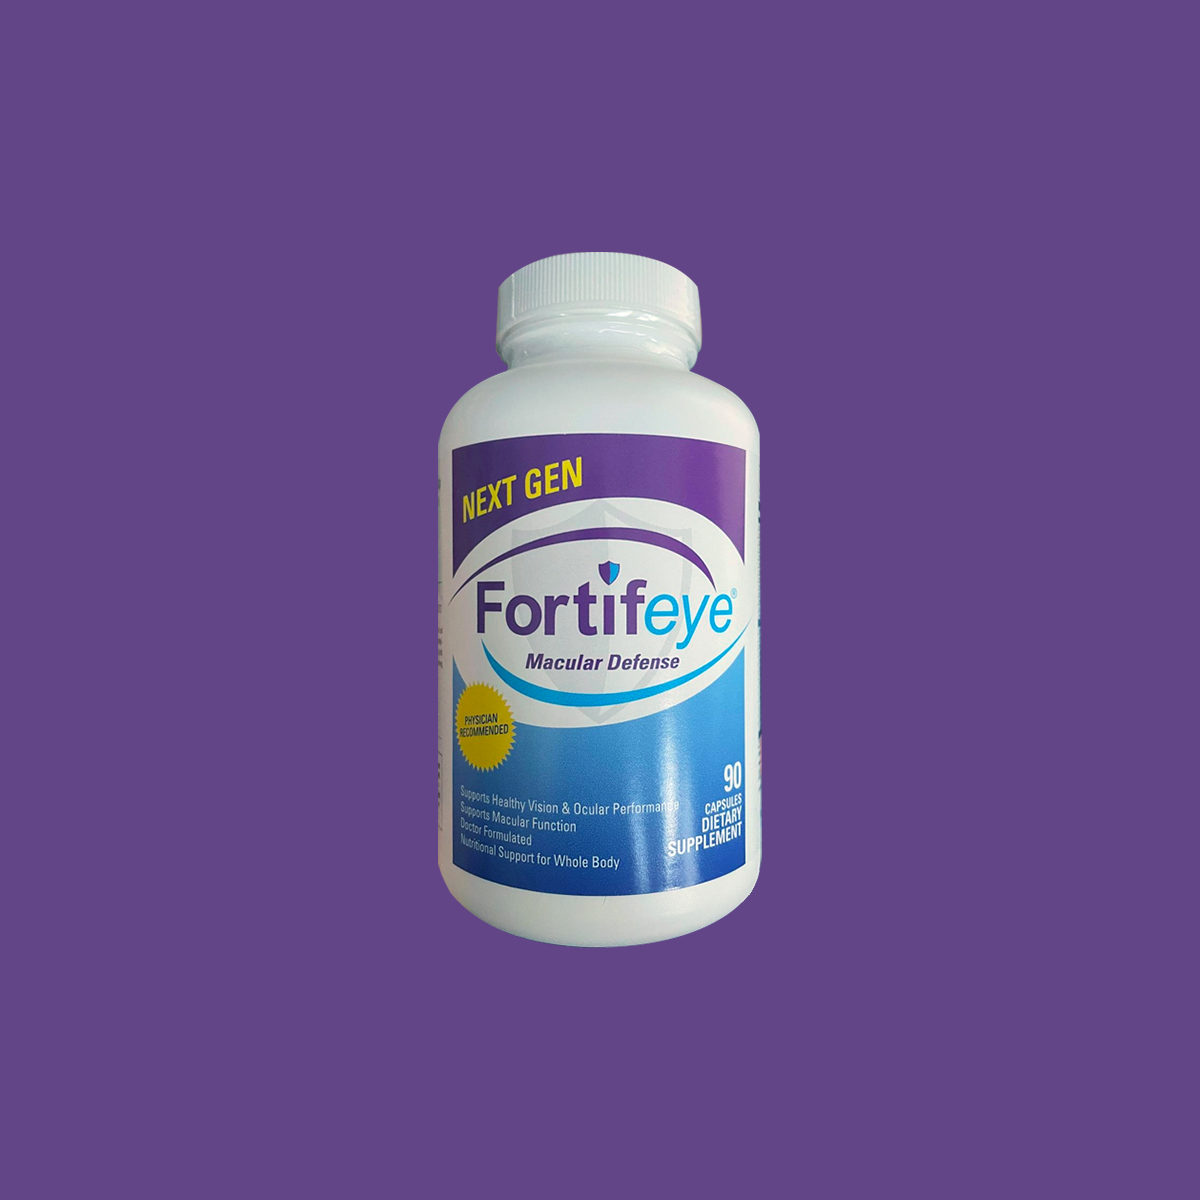 Fortifeye Next Gen Macular Defense Eye and Whole Body Support (90ct - 3 Month Supply)